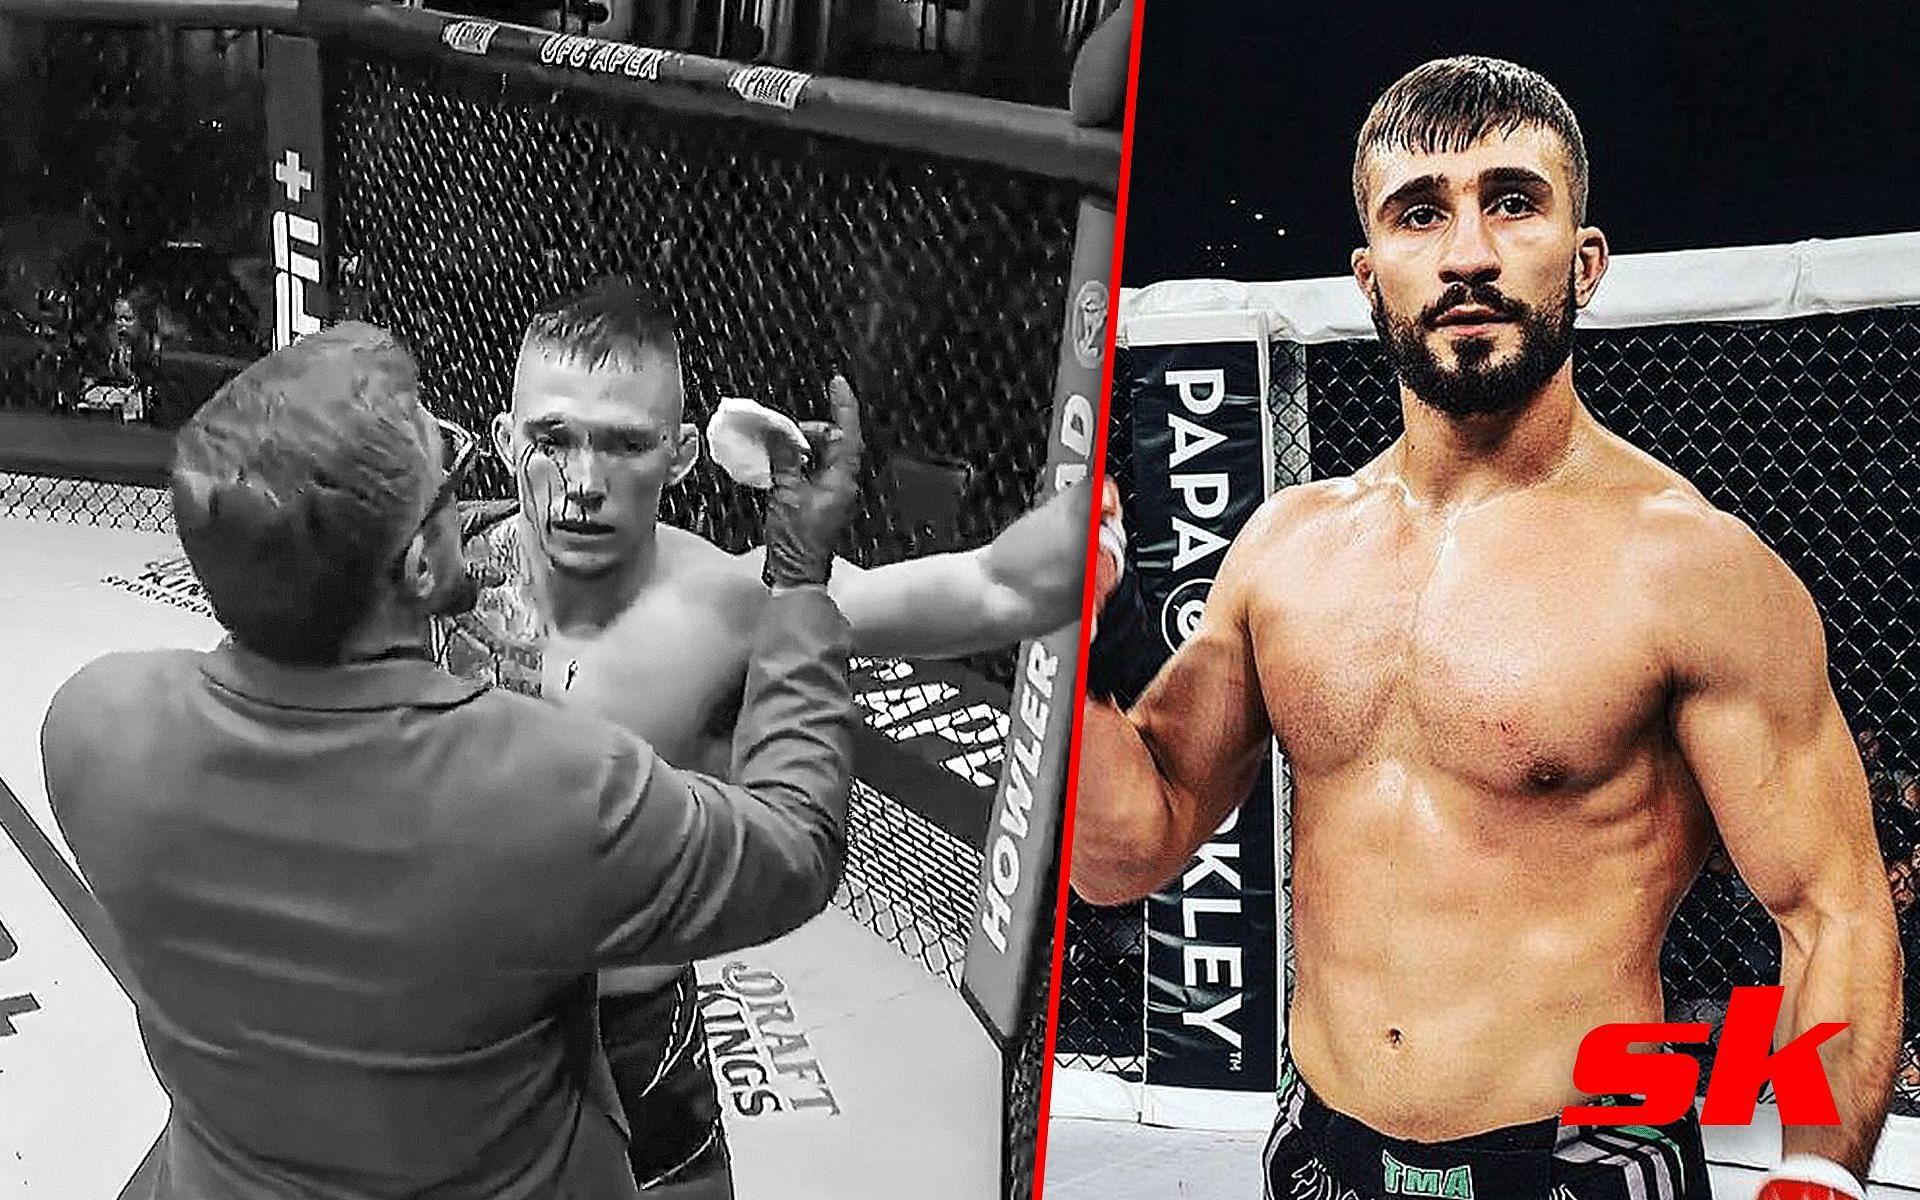 Doctor stoppage (Left) and Nazim Sadykhov (Right) [Images via: @ufc on Twitter and @naz_mma on Instagram]